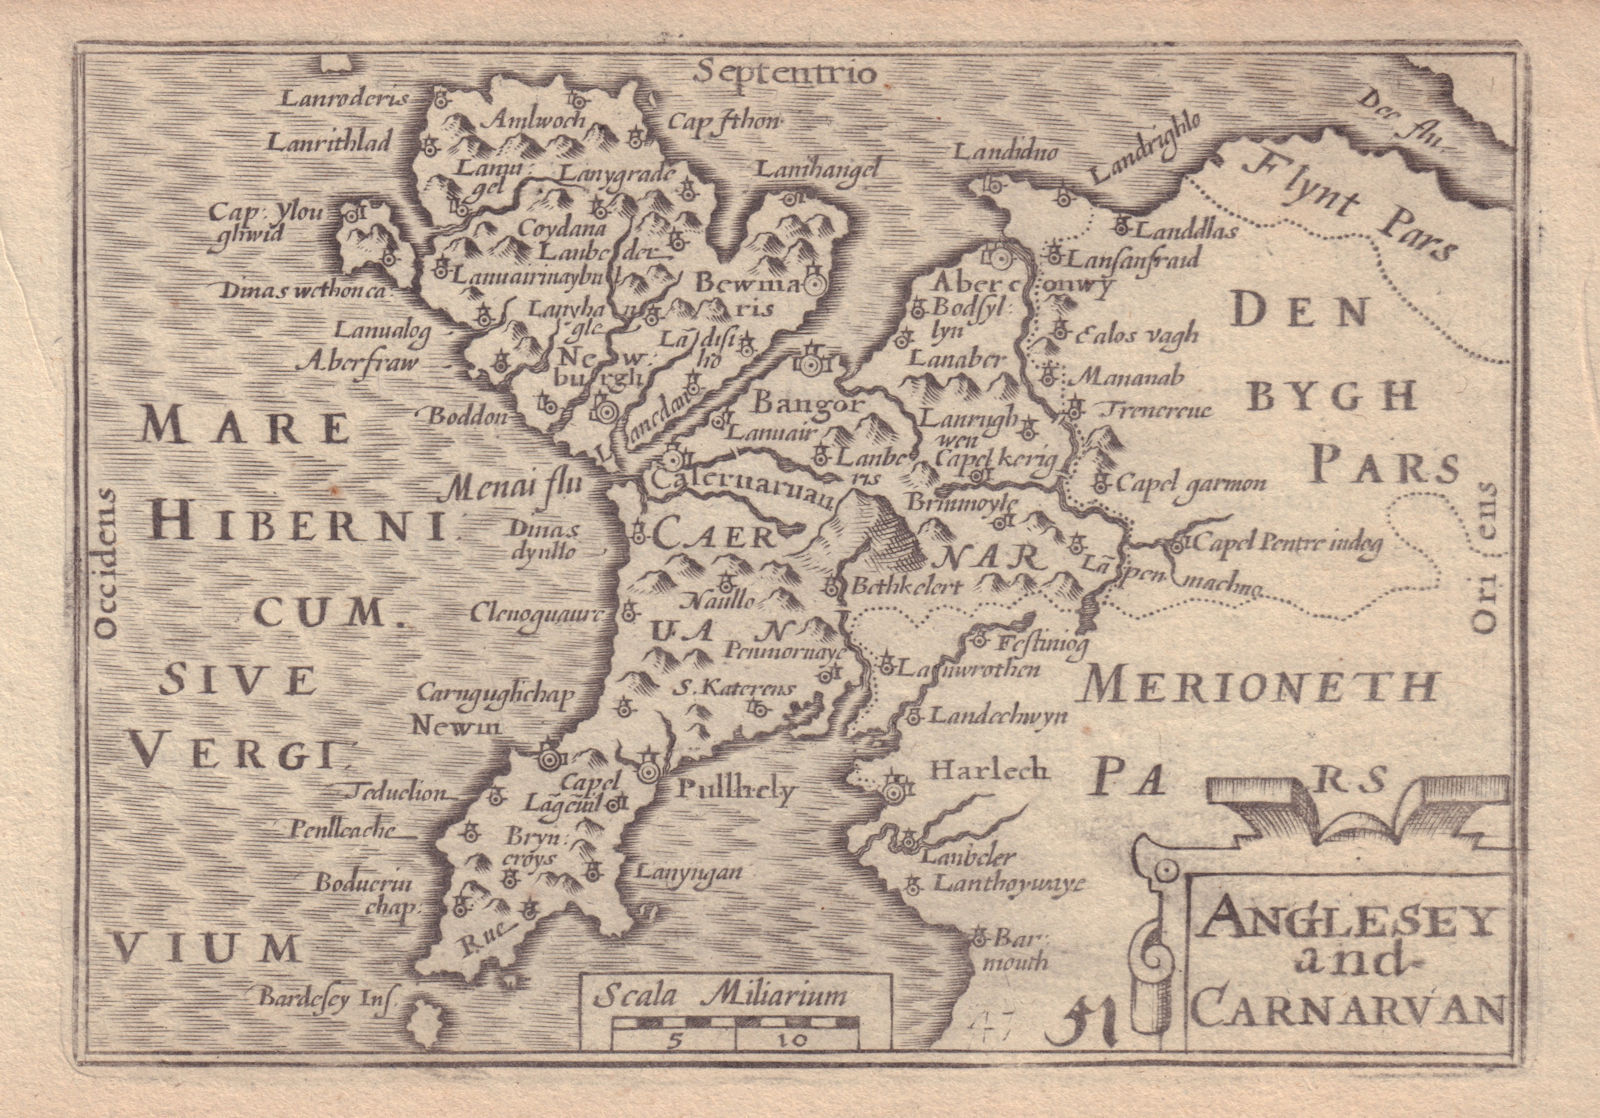 Anglesey and Carnarvan by van den Keere. "Speed miniature" 1632 old map